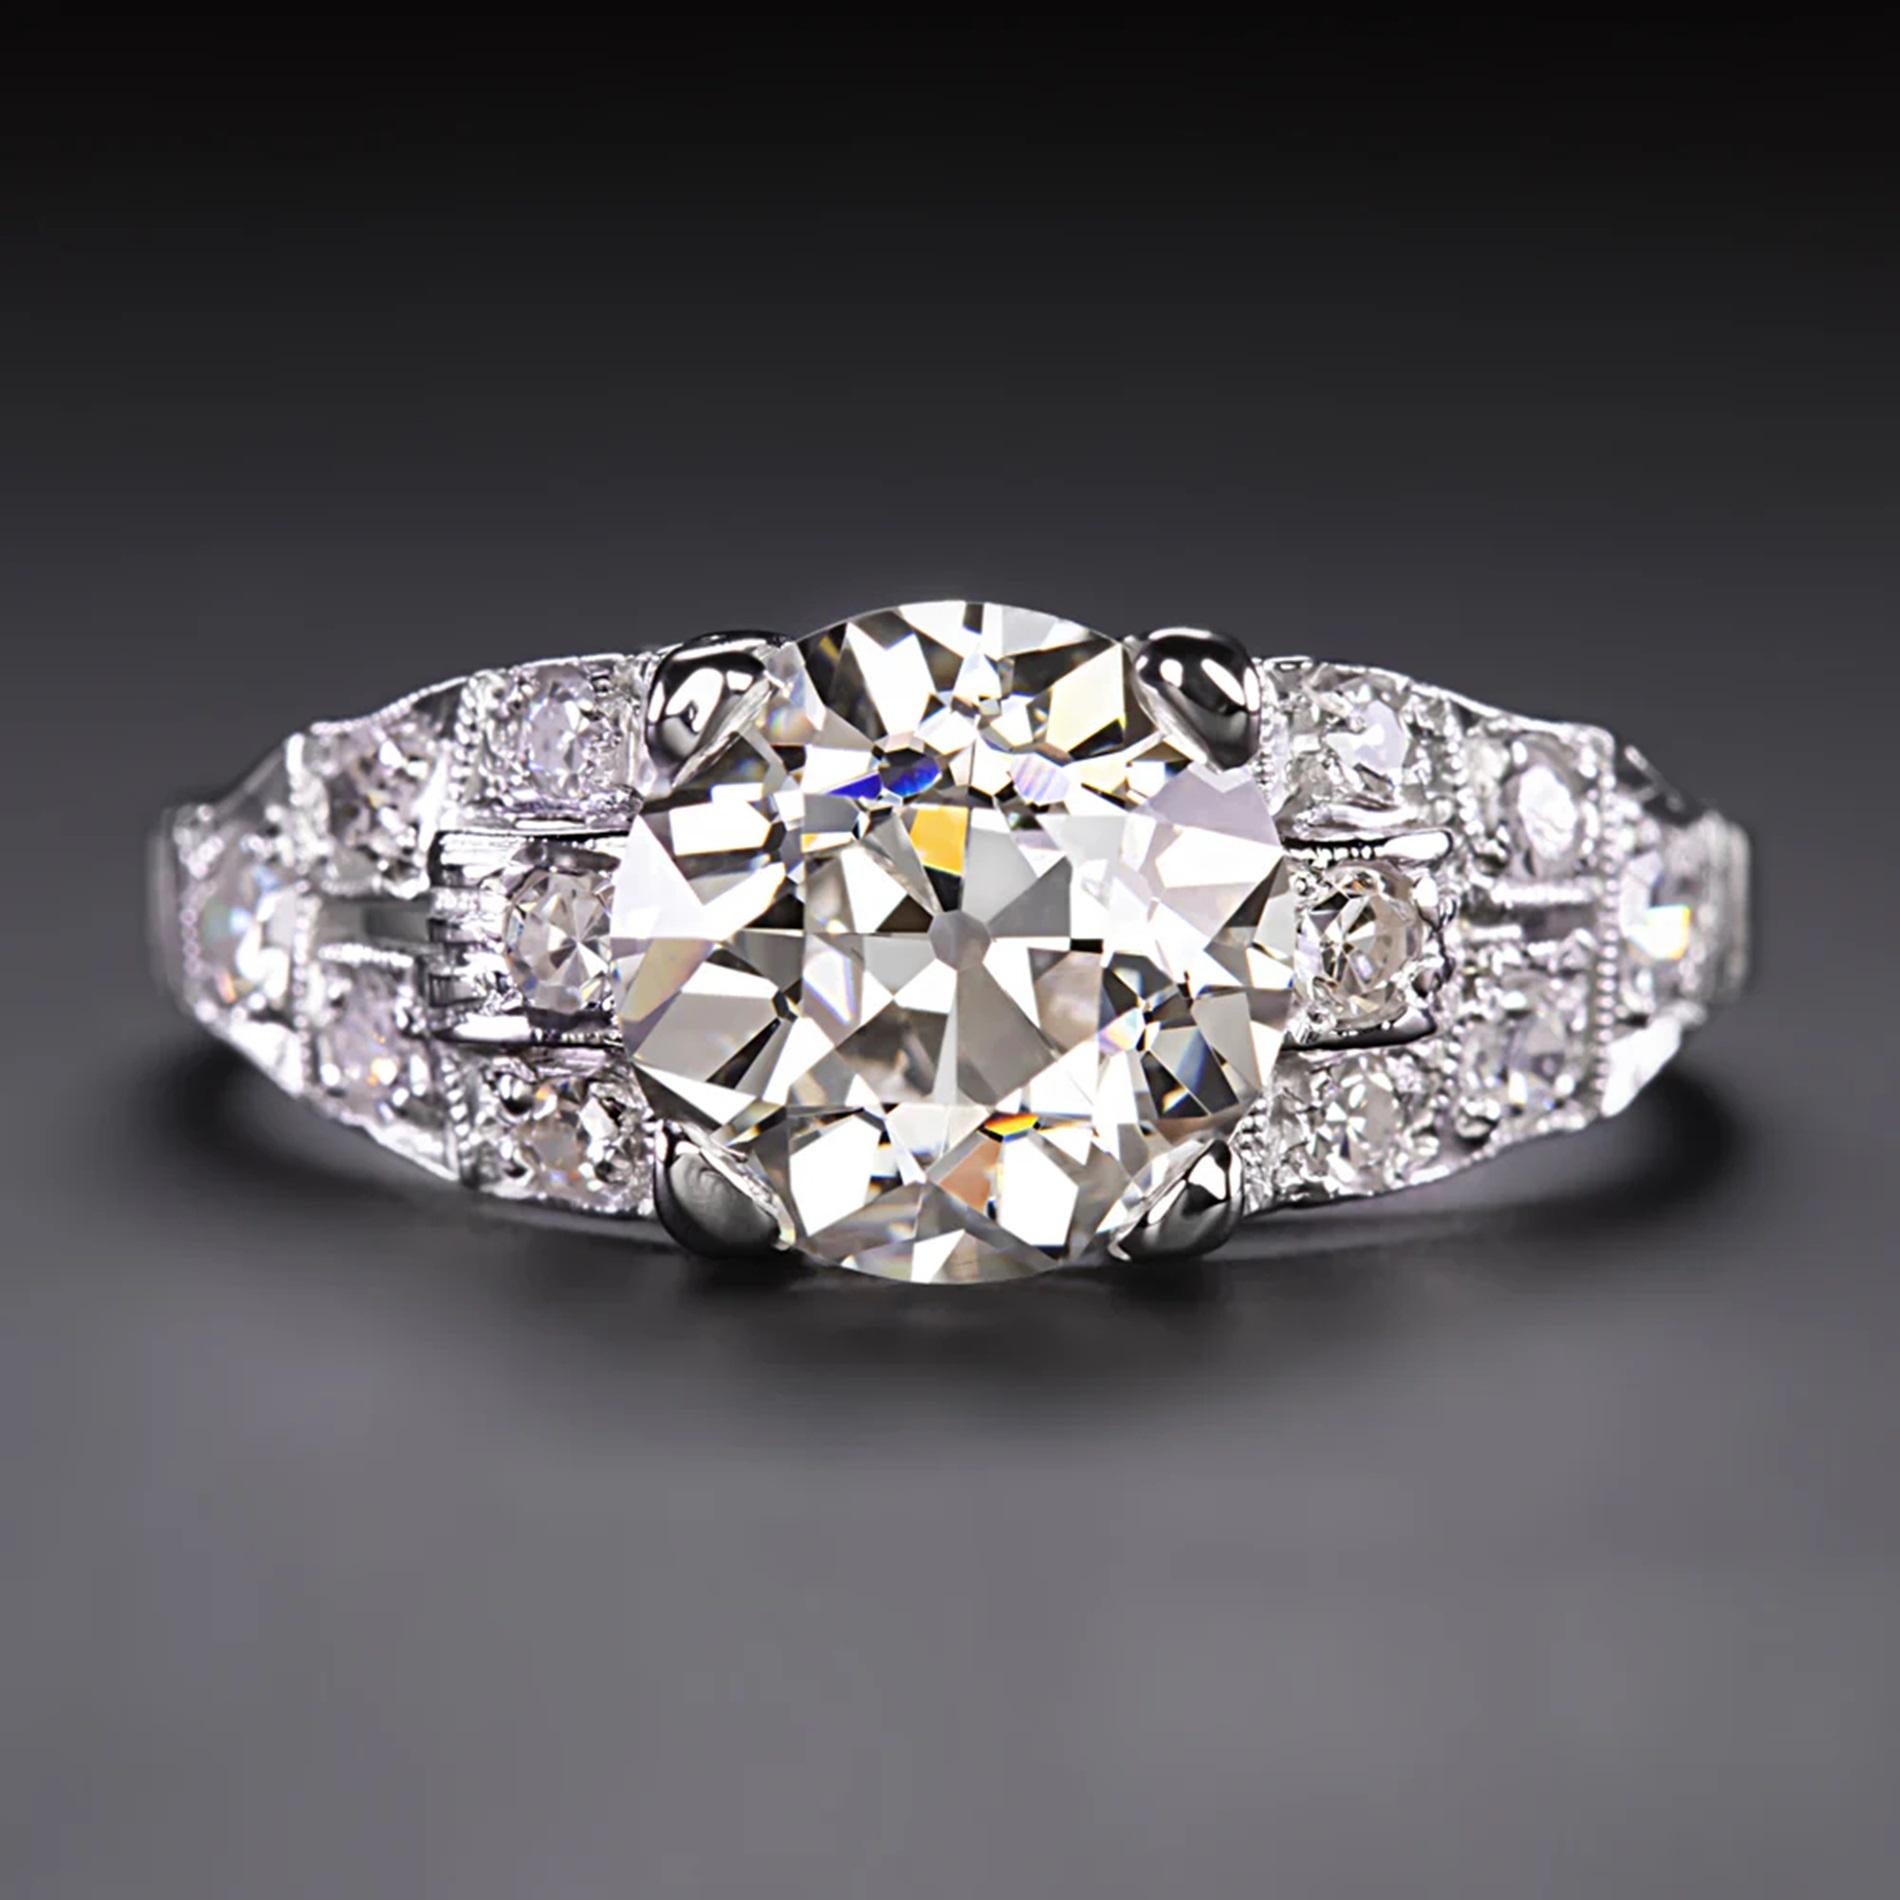 This gorgeous diamond engagement ring has a head turning look with an impressively large 1.84ct old transitional cut diamond center and a sumptuous diamond encrusted face! Crafted by hand during the Art Deco era, this is a very high quality and well